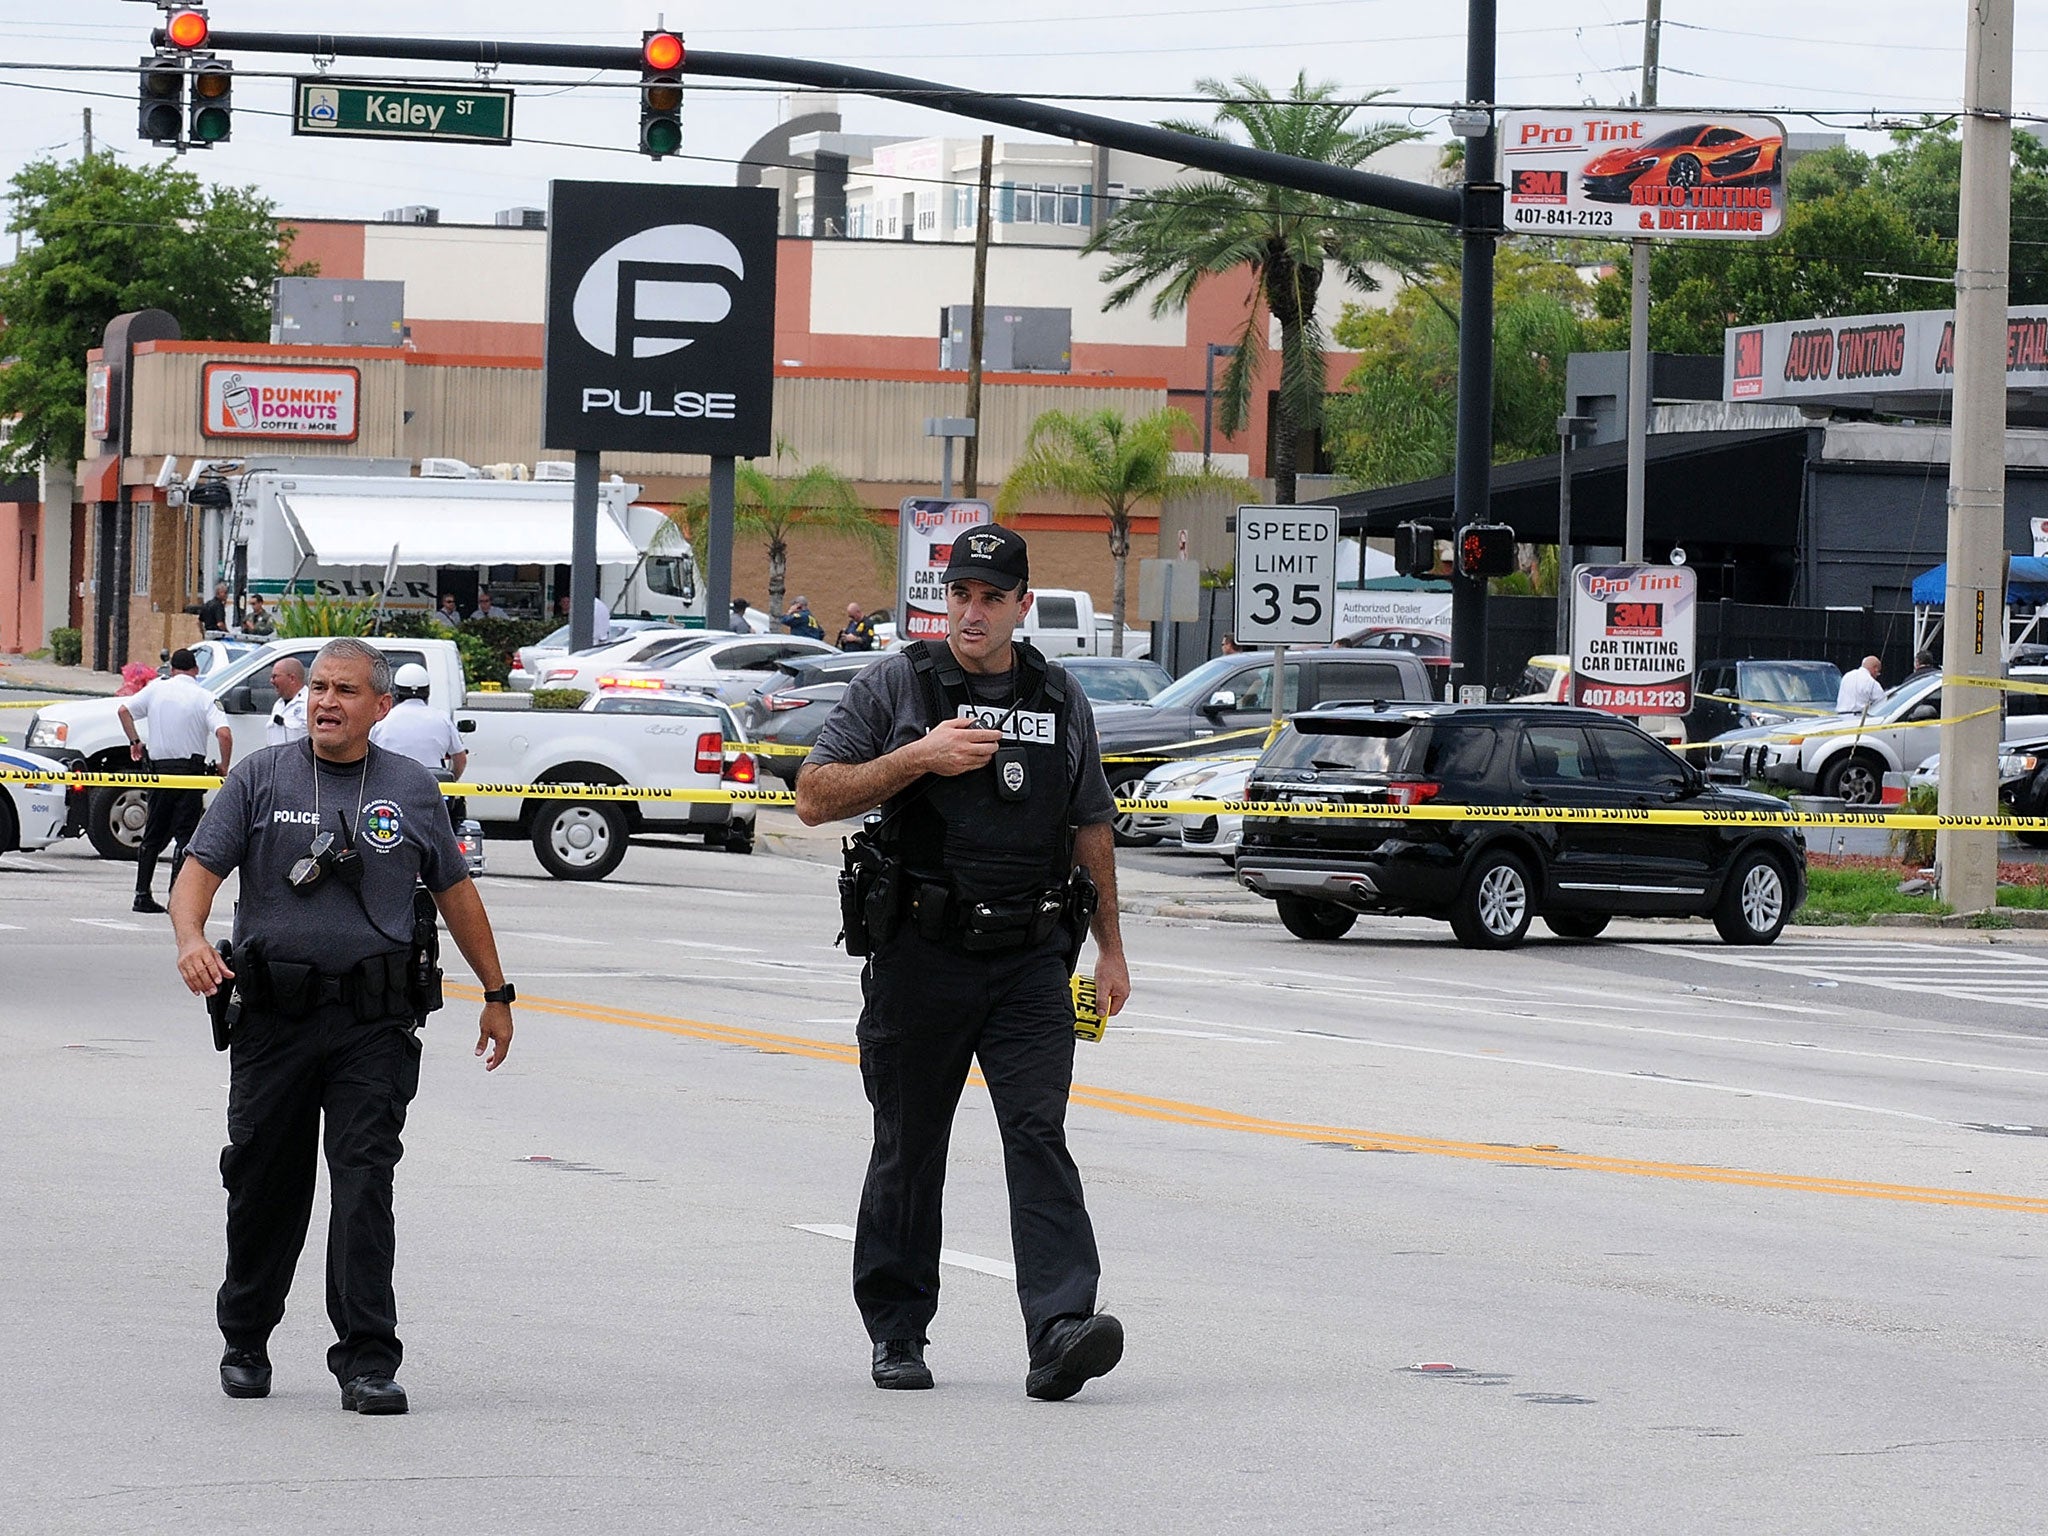 Police outside the Pulse nightclub in Orlando, scene of the worst mass shooting in US history